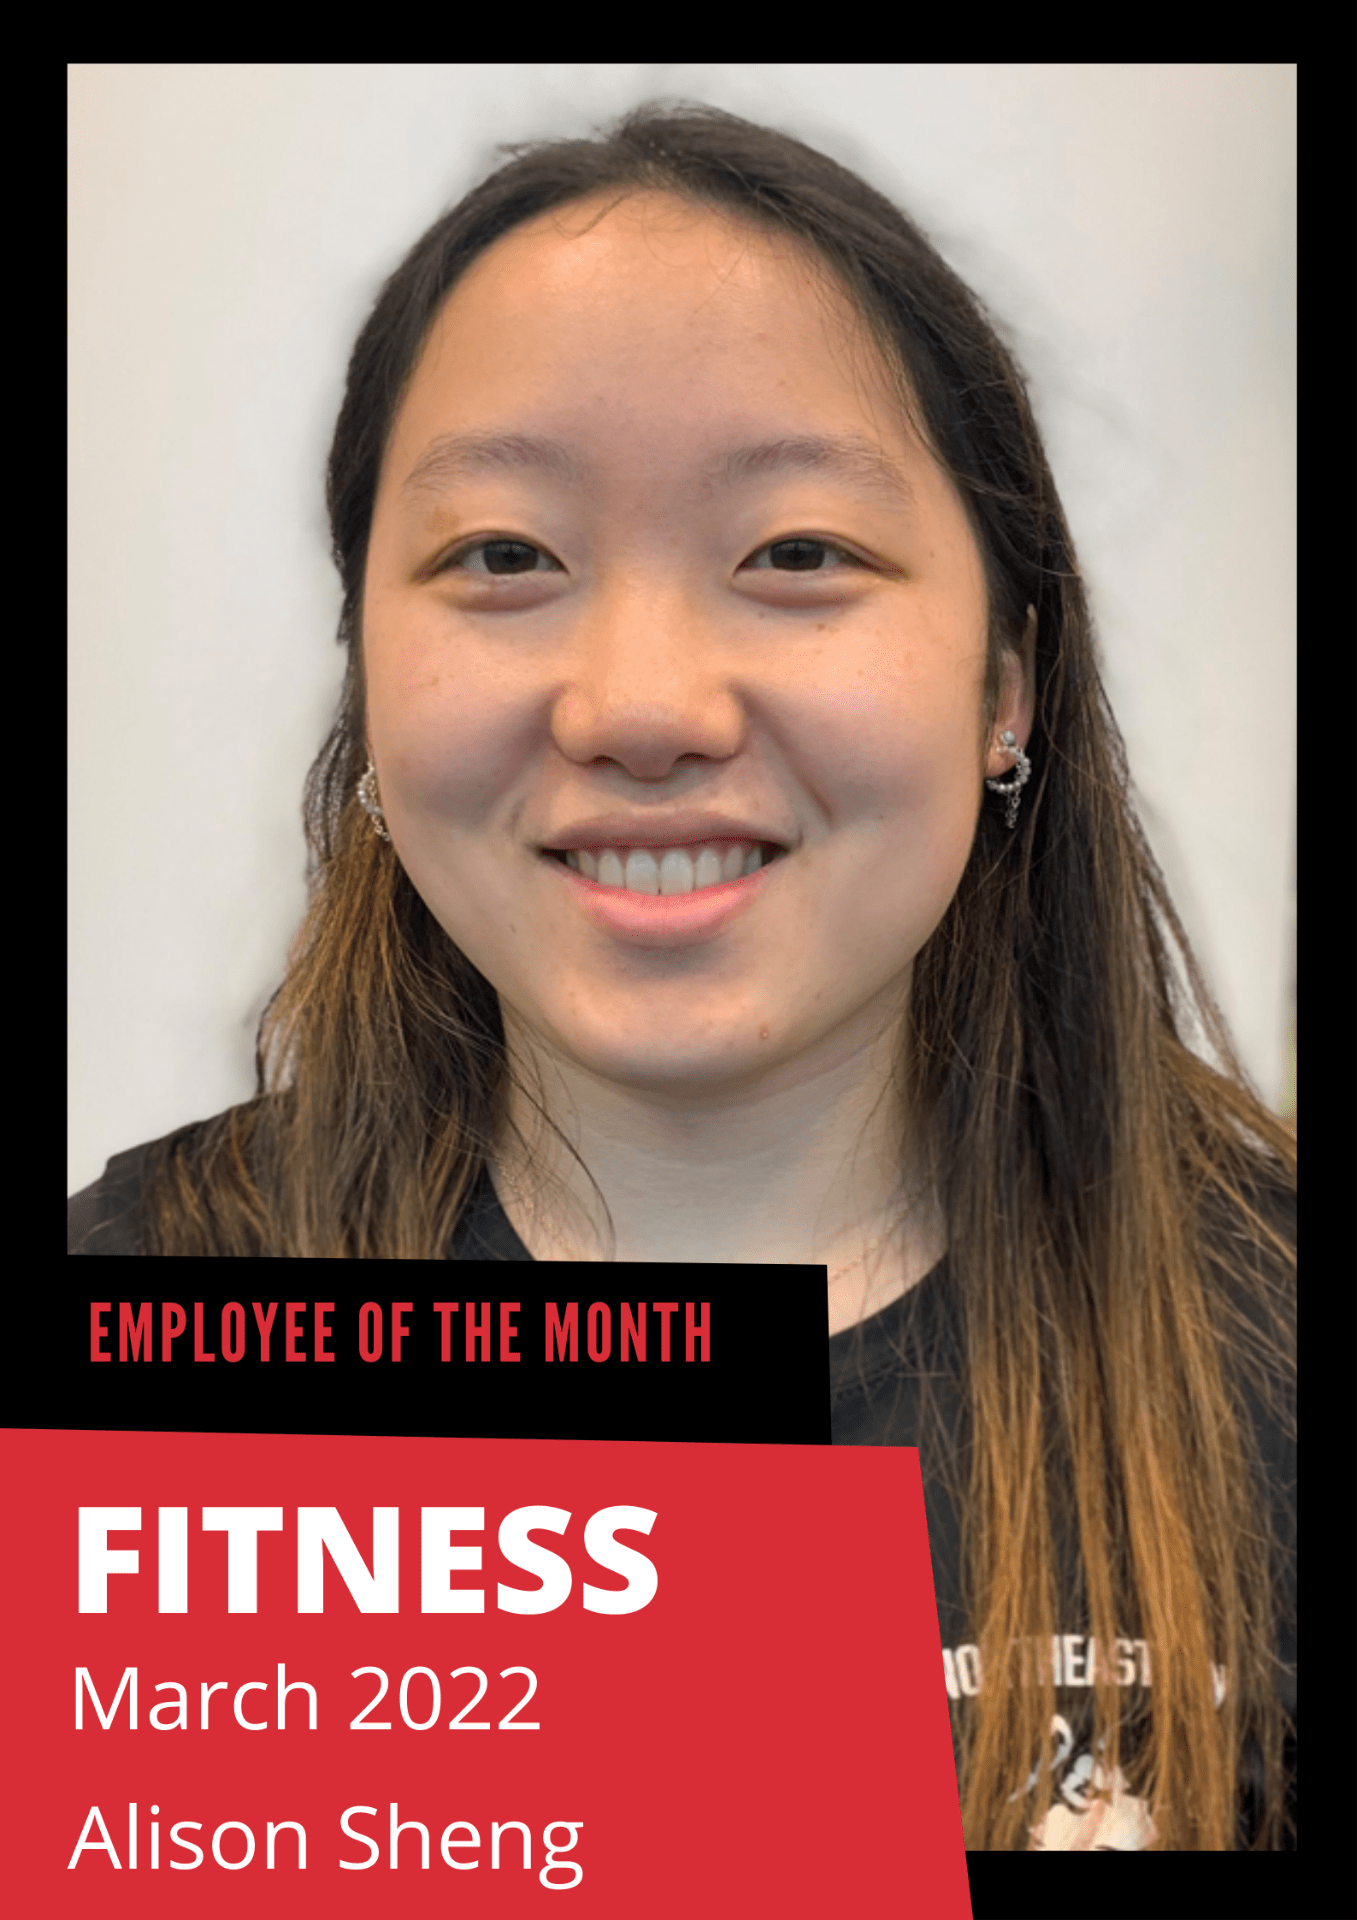 Employee of the Month, Fitness, March 2022, Alison Sheng